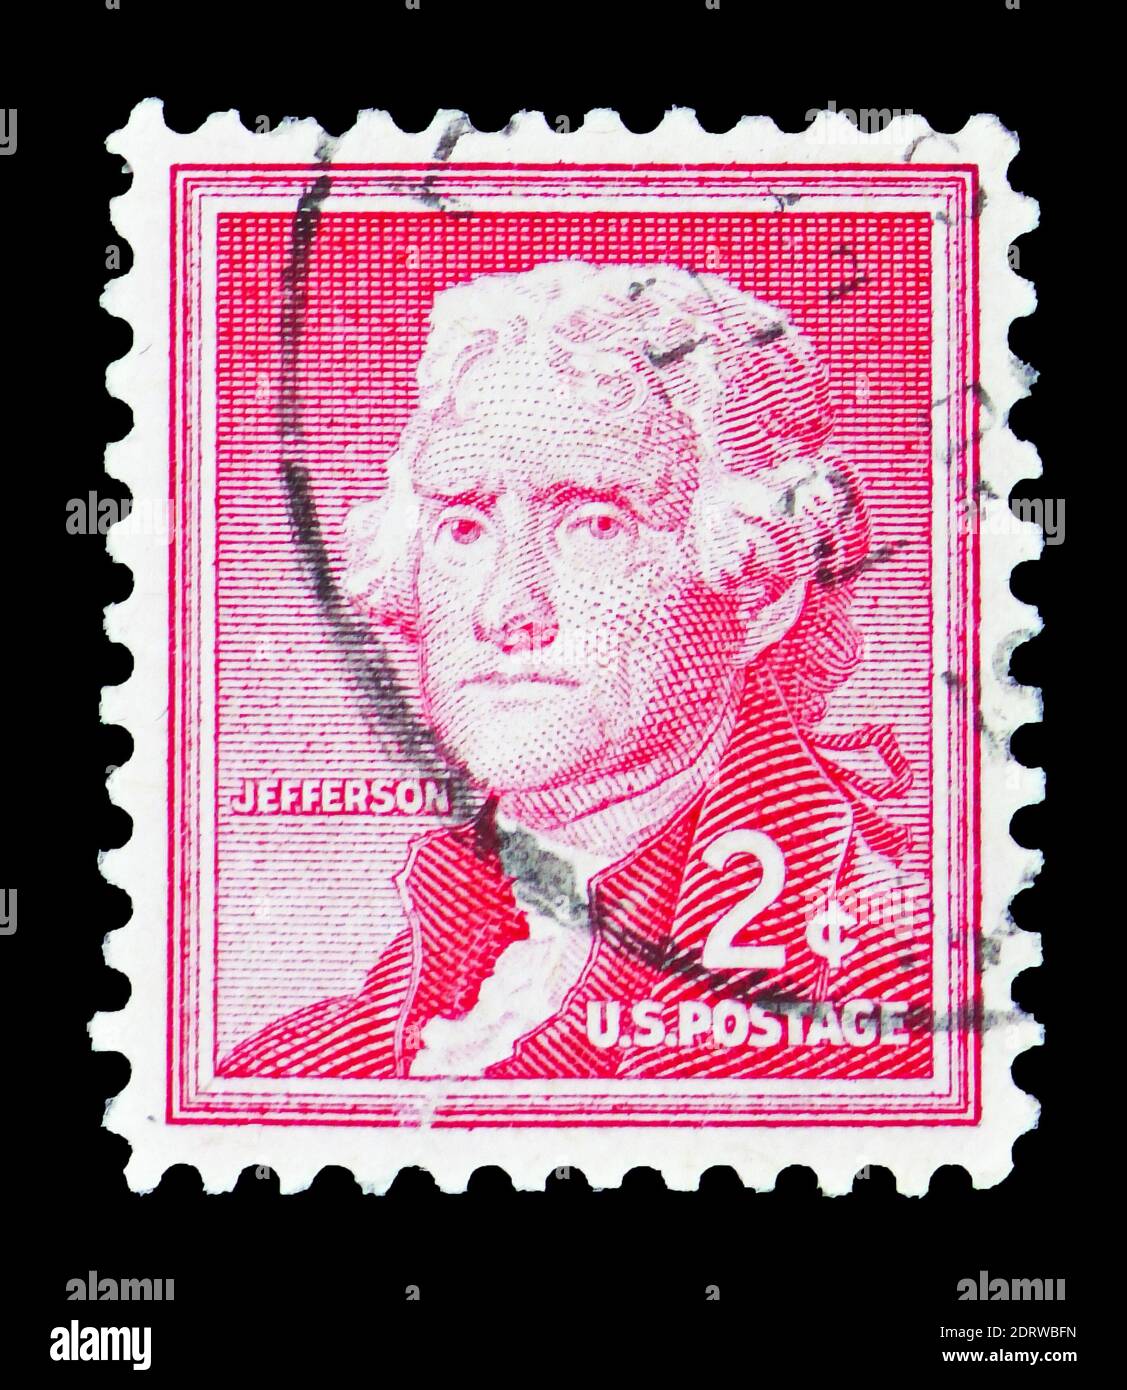 MOSCOW, RUSSIA - FEBRUARY 10, 2019: A stamp printed in United States shows Thomas Jefferson (1743-1826), third President of the U.S.A., Liberty Issue Stock Photo